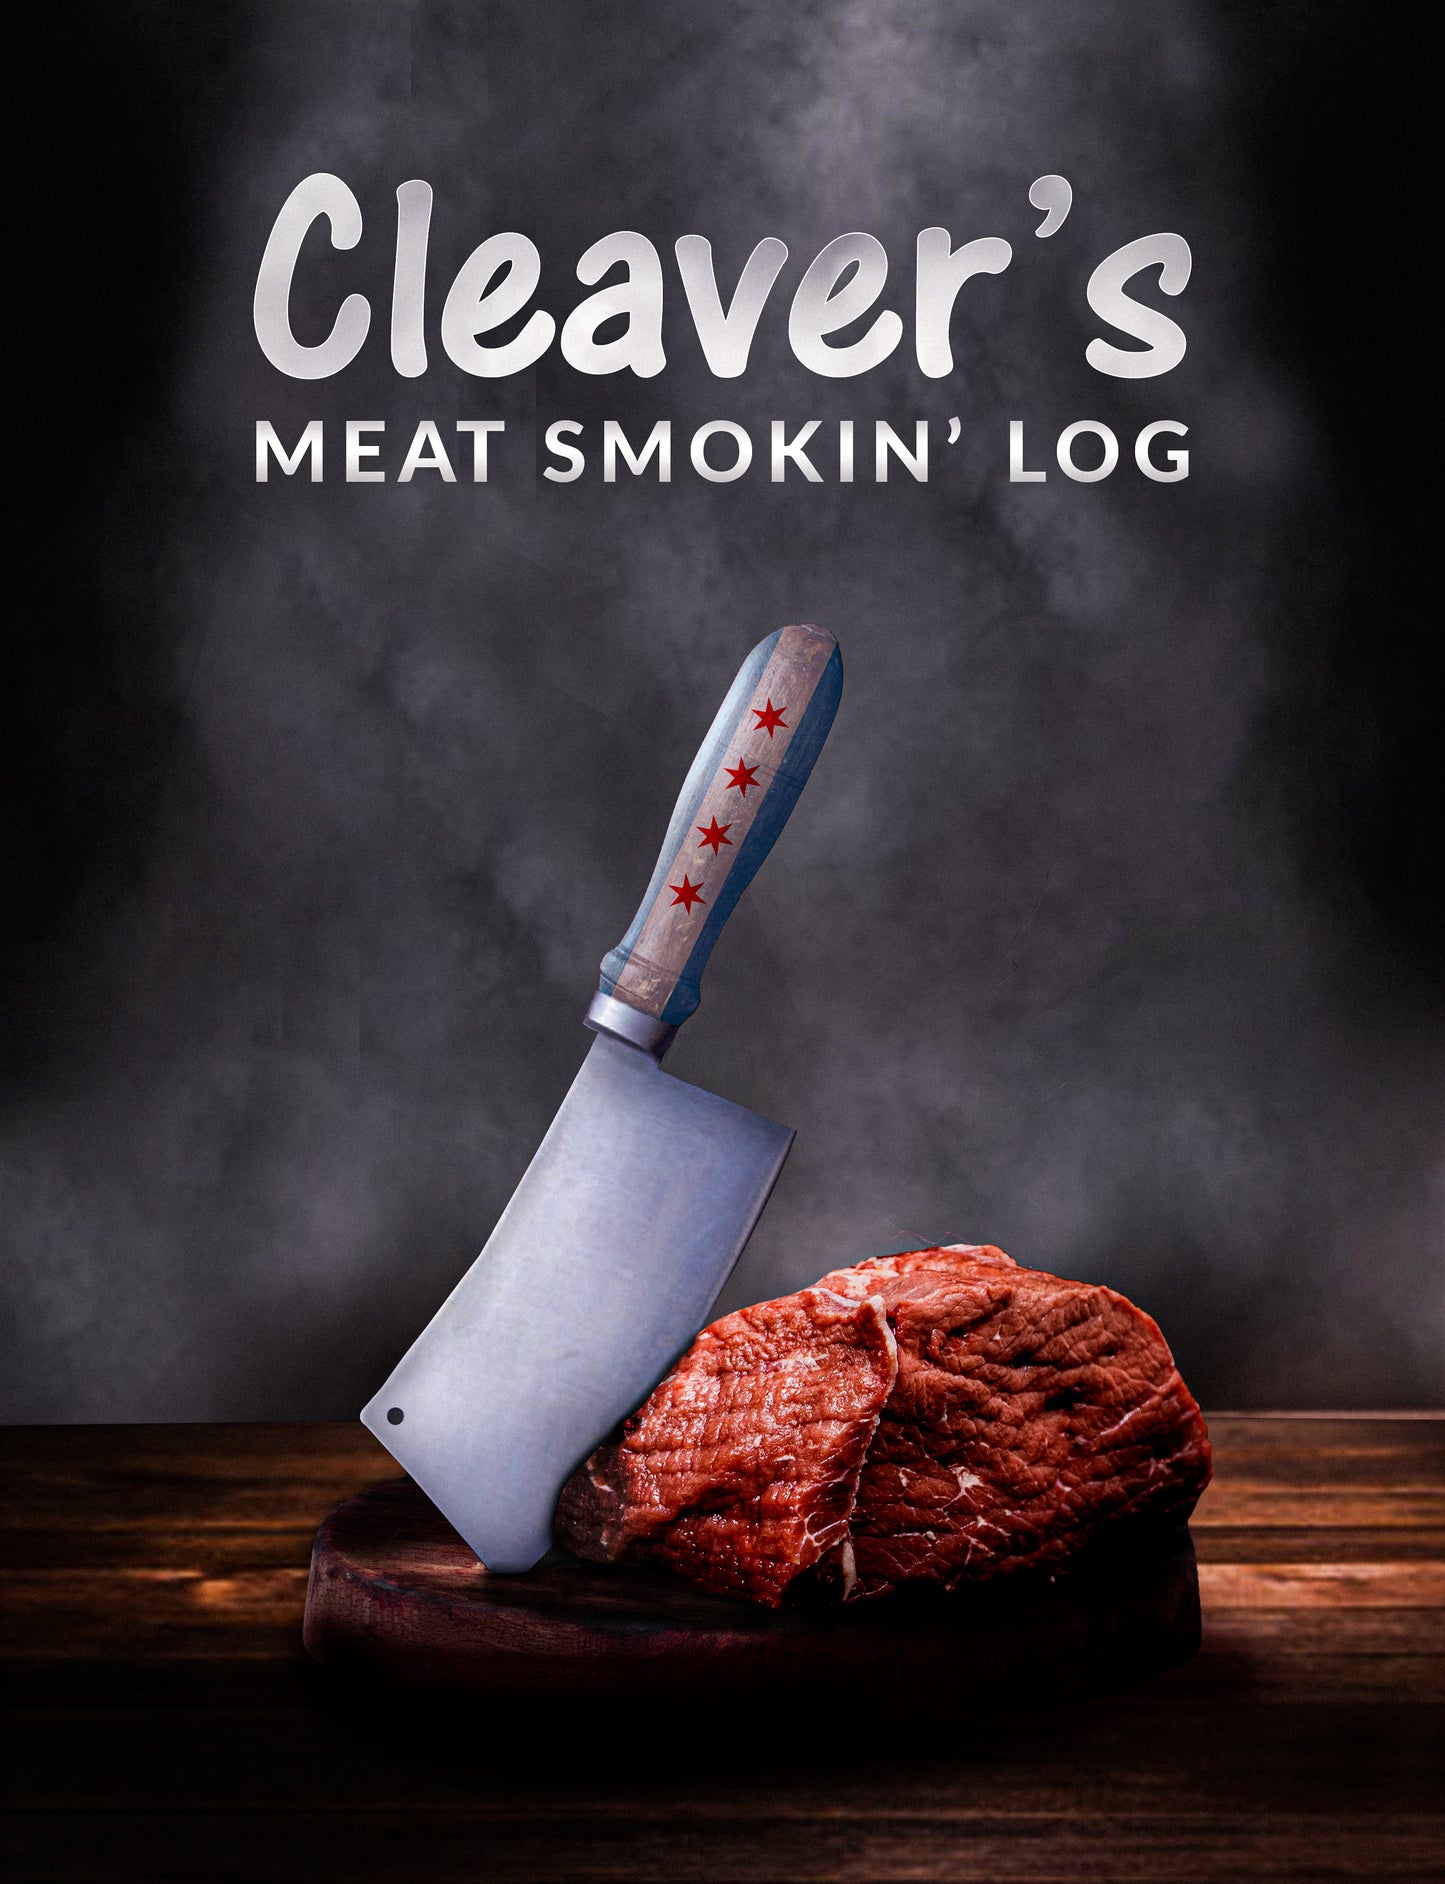 Chicago Cleaver's Meat Smokin' Log